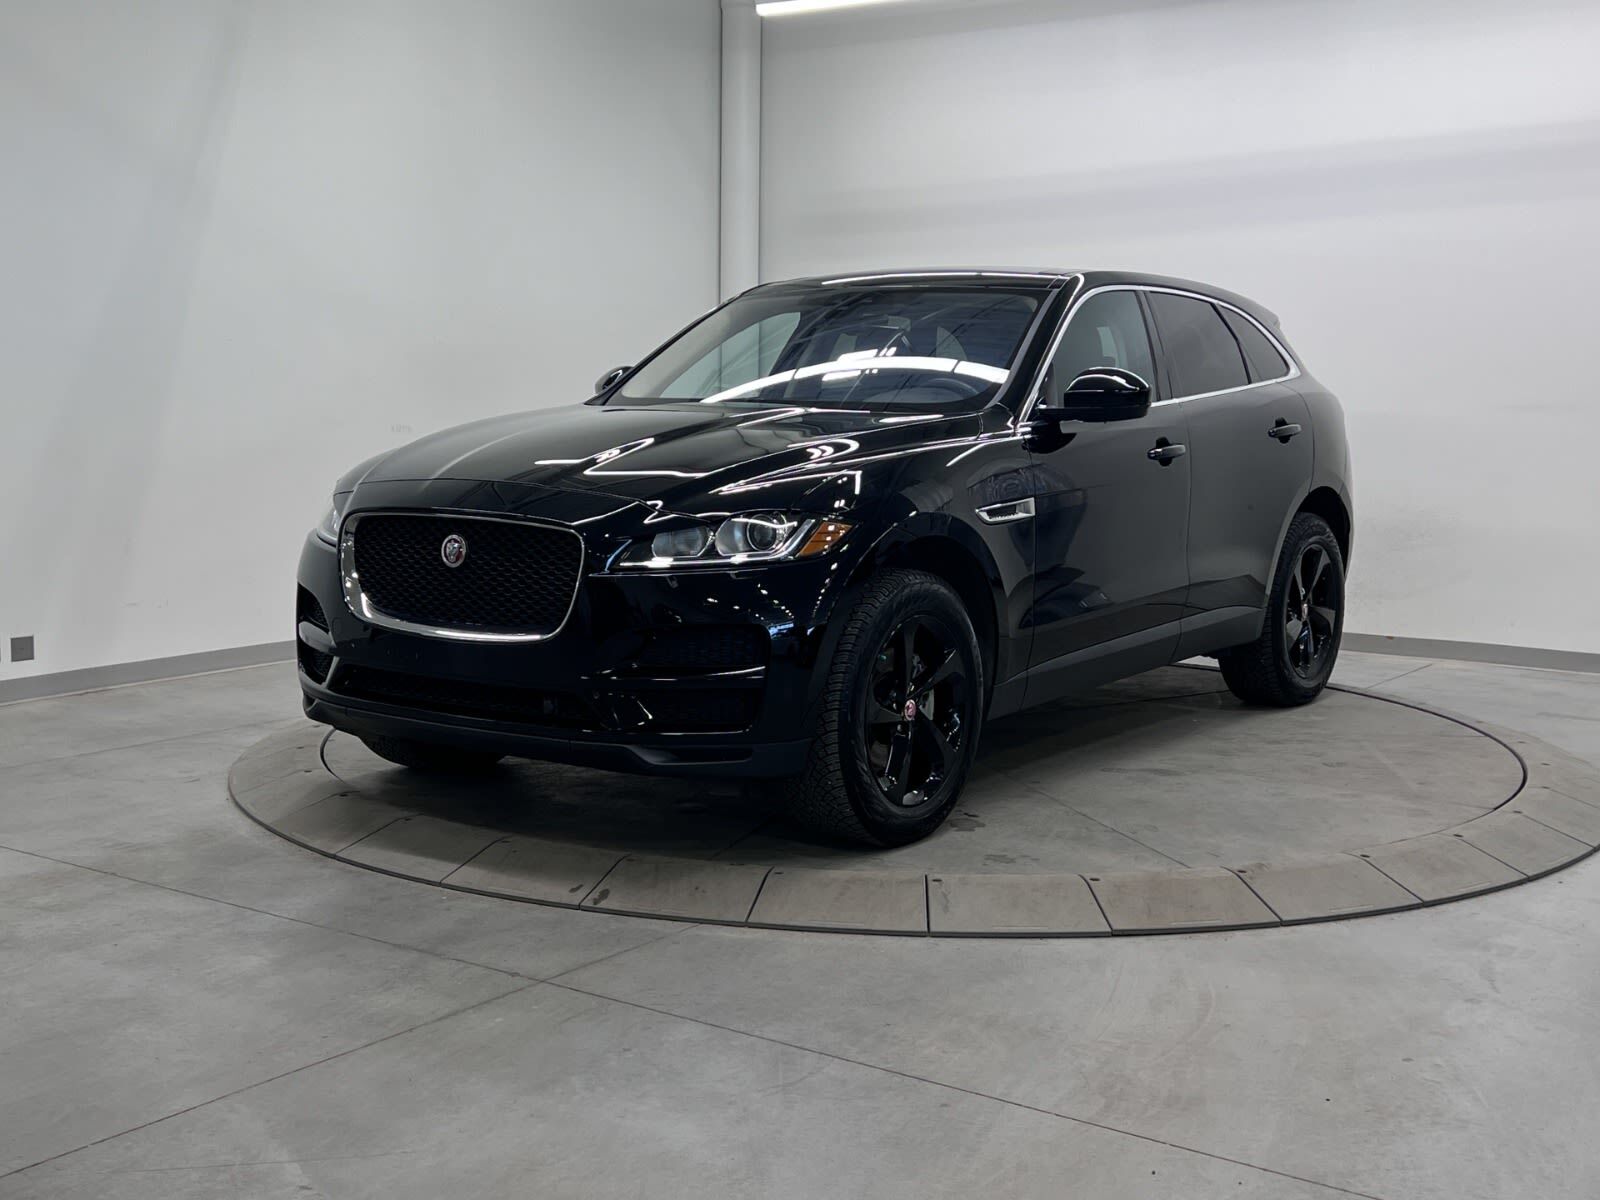 2020 Jaguar F-Pace CERTIFIED PRE OWNED RATES AS LOW AS 3.99%